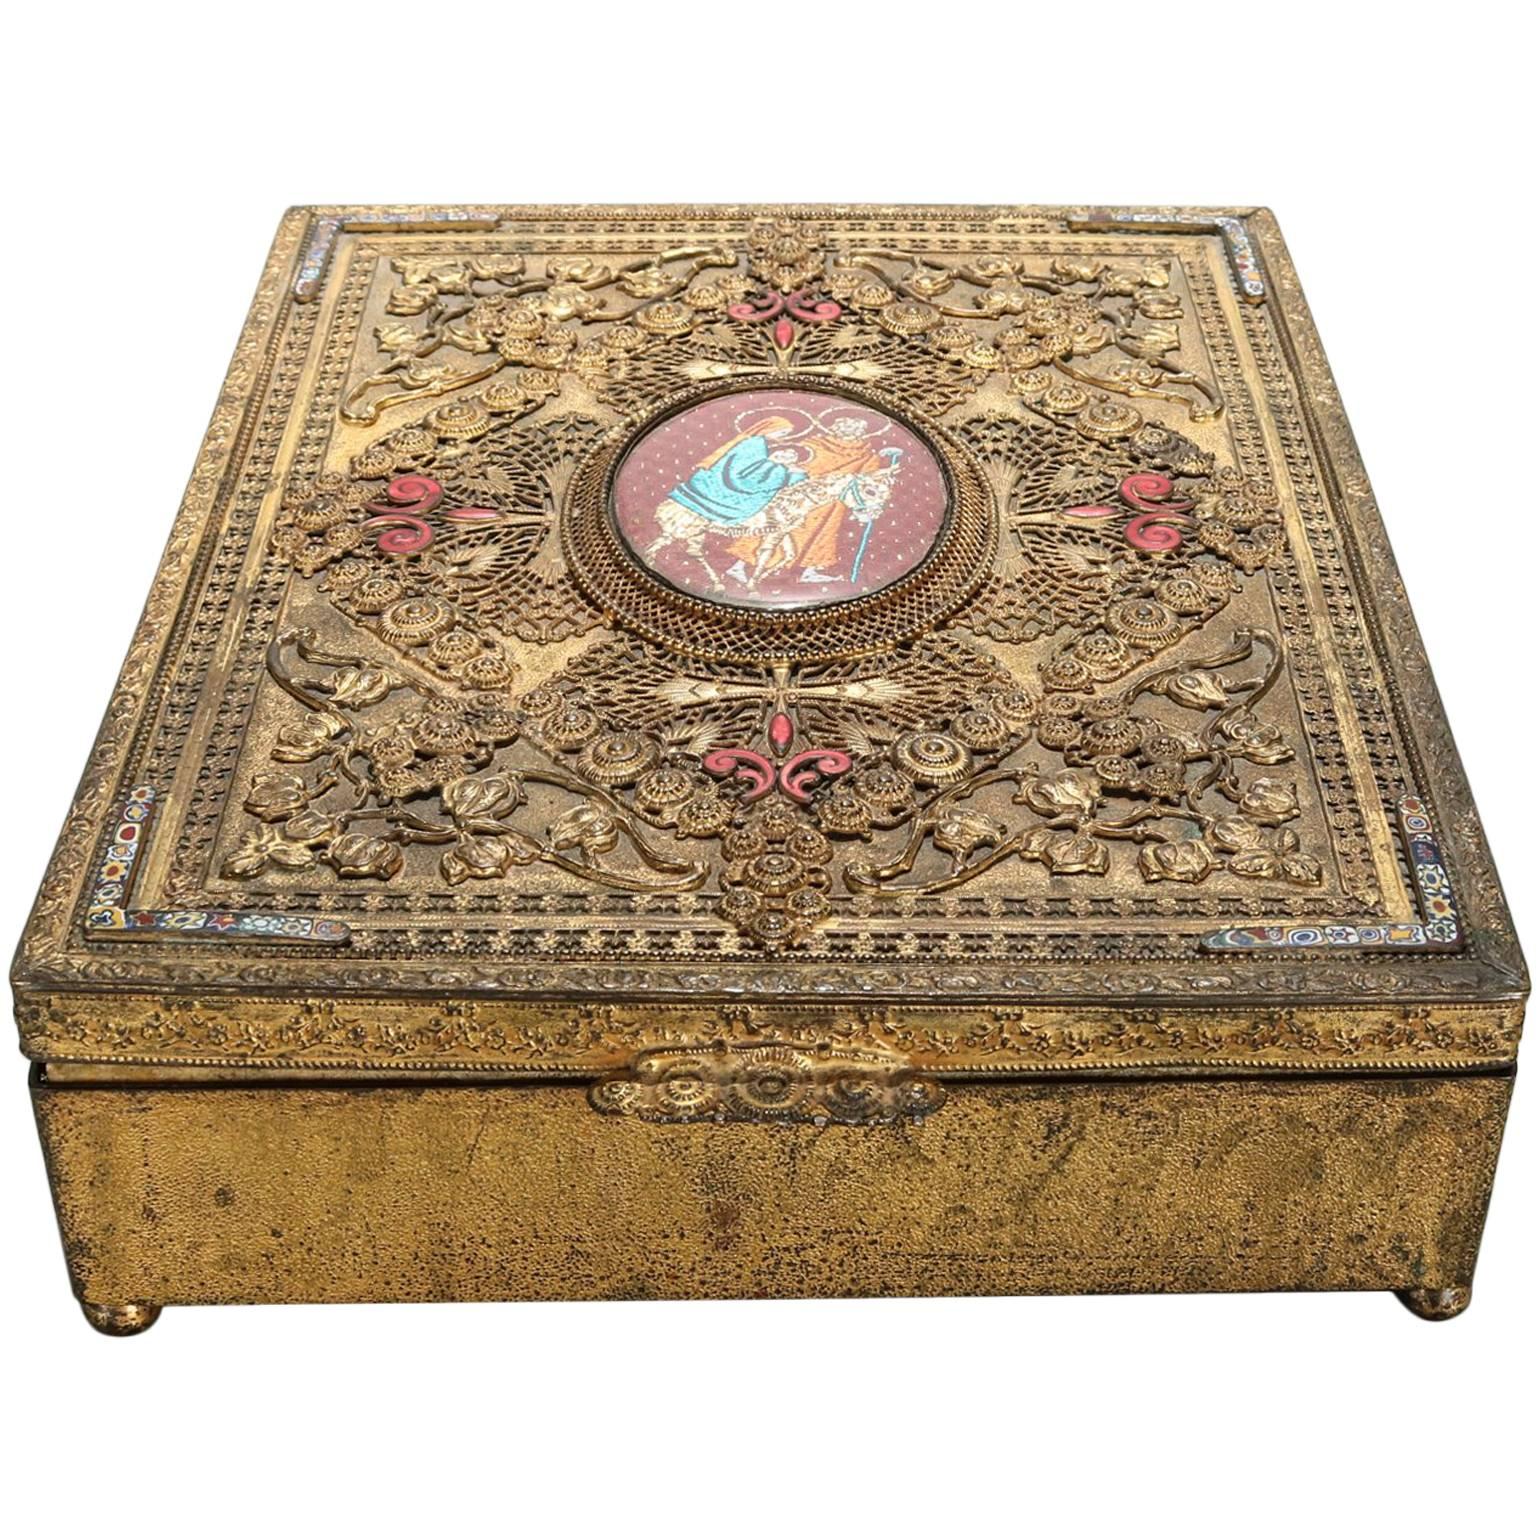 Antique Gilt Metal Jeweled Bible Box with the Holy Family by E. & J.B. Empire